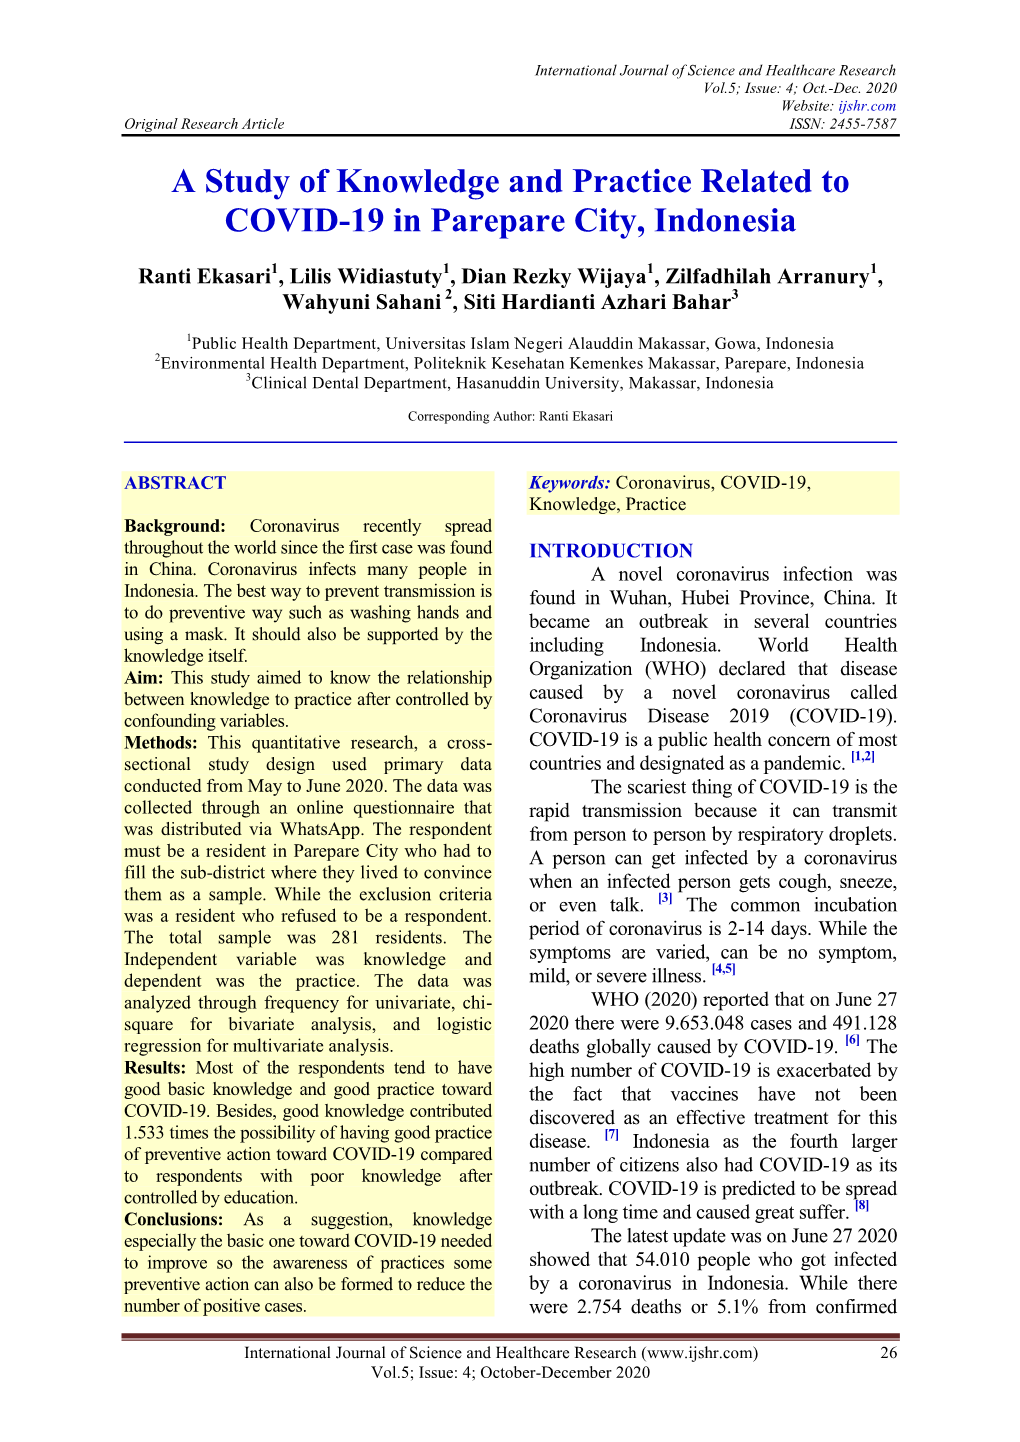 A Study of Knowledge and Practice Related to Covid-19 in Parepare City, Indonesia